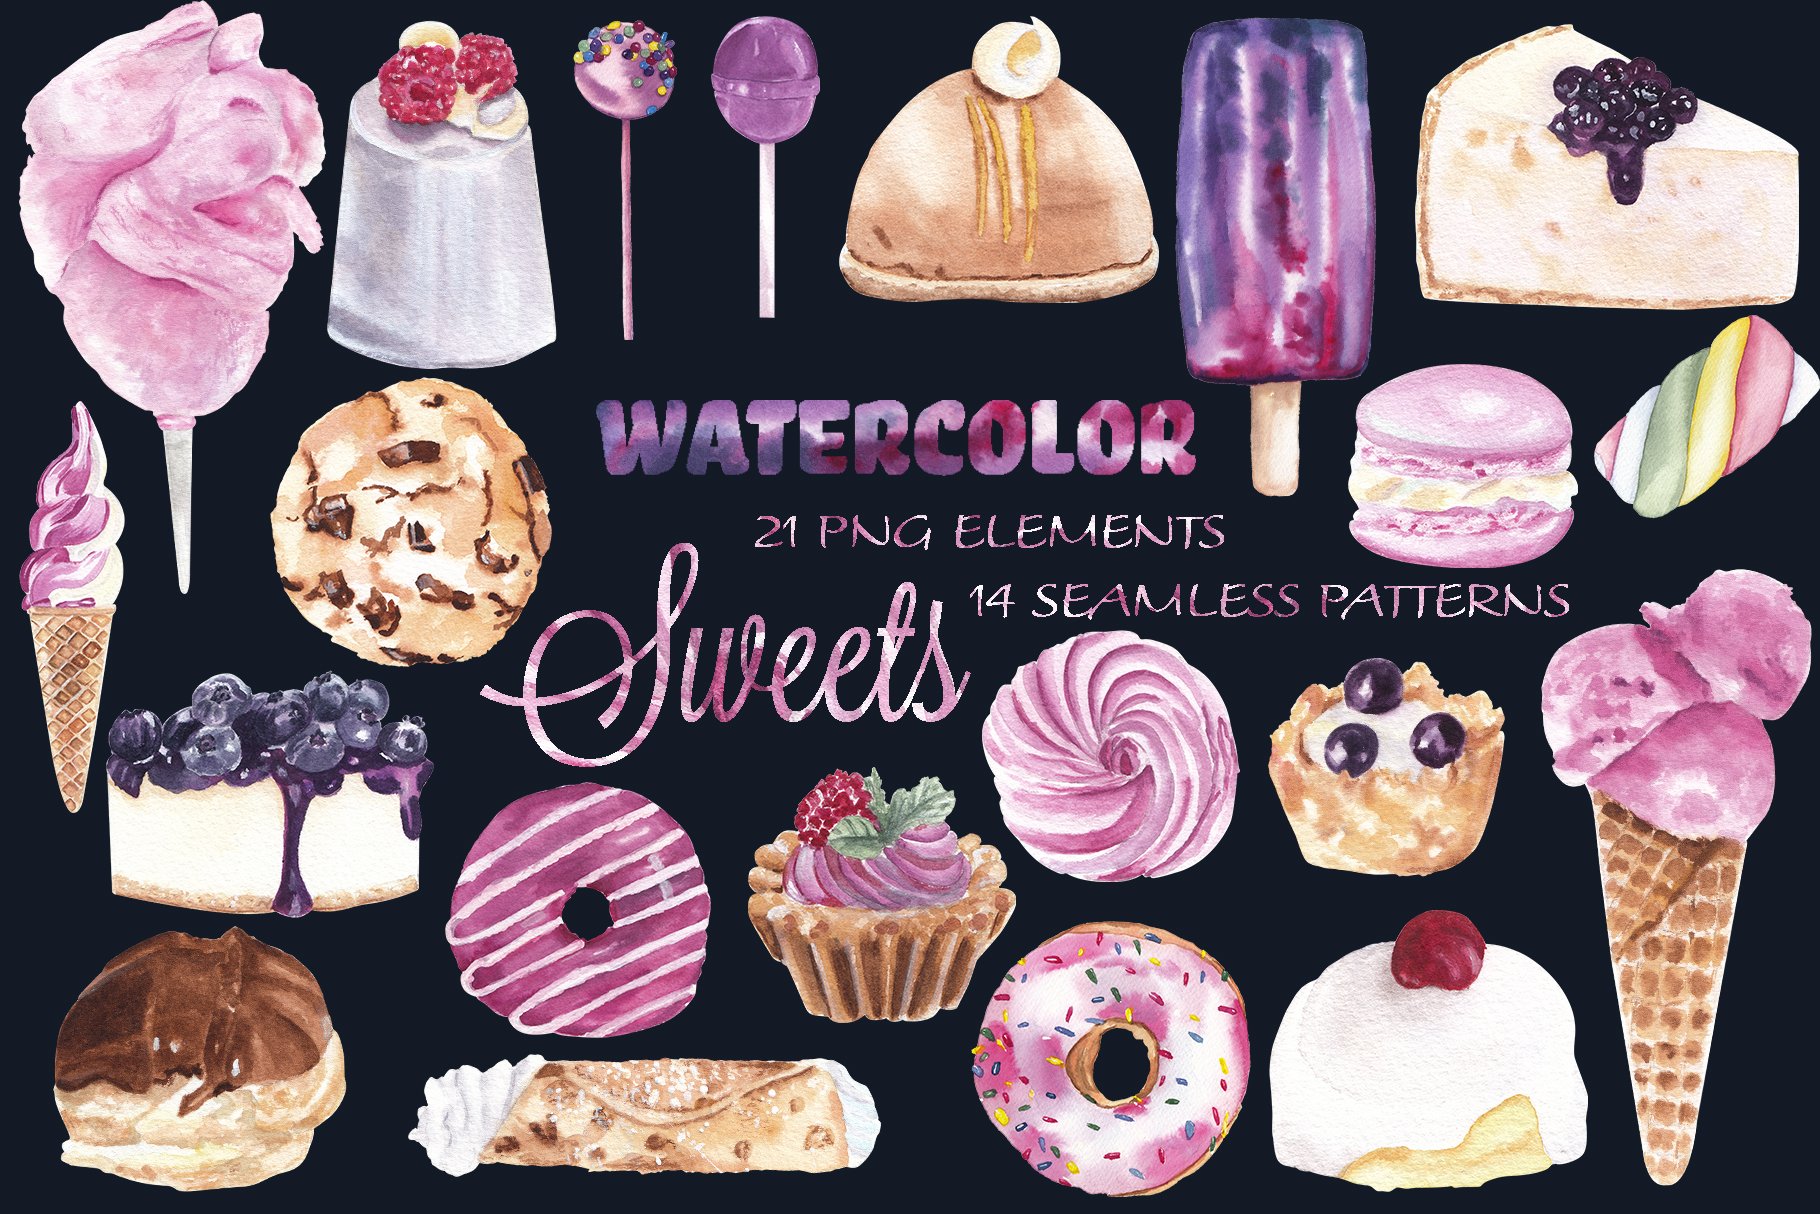 Sweets & desserts clipart & patterns cover image.